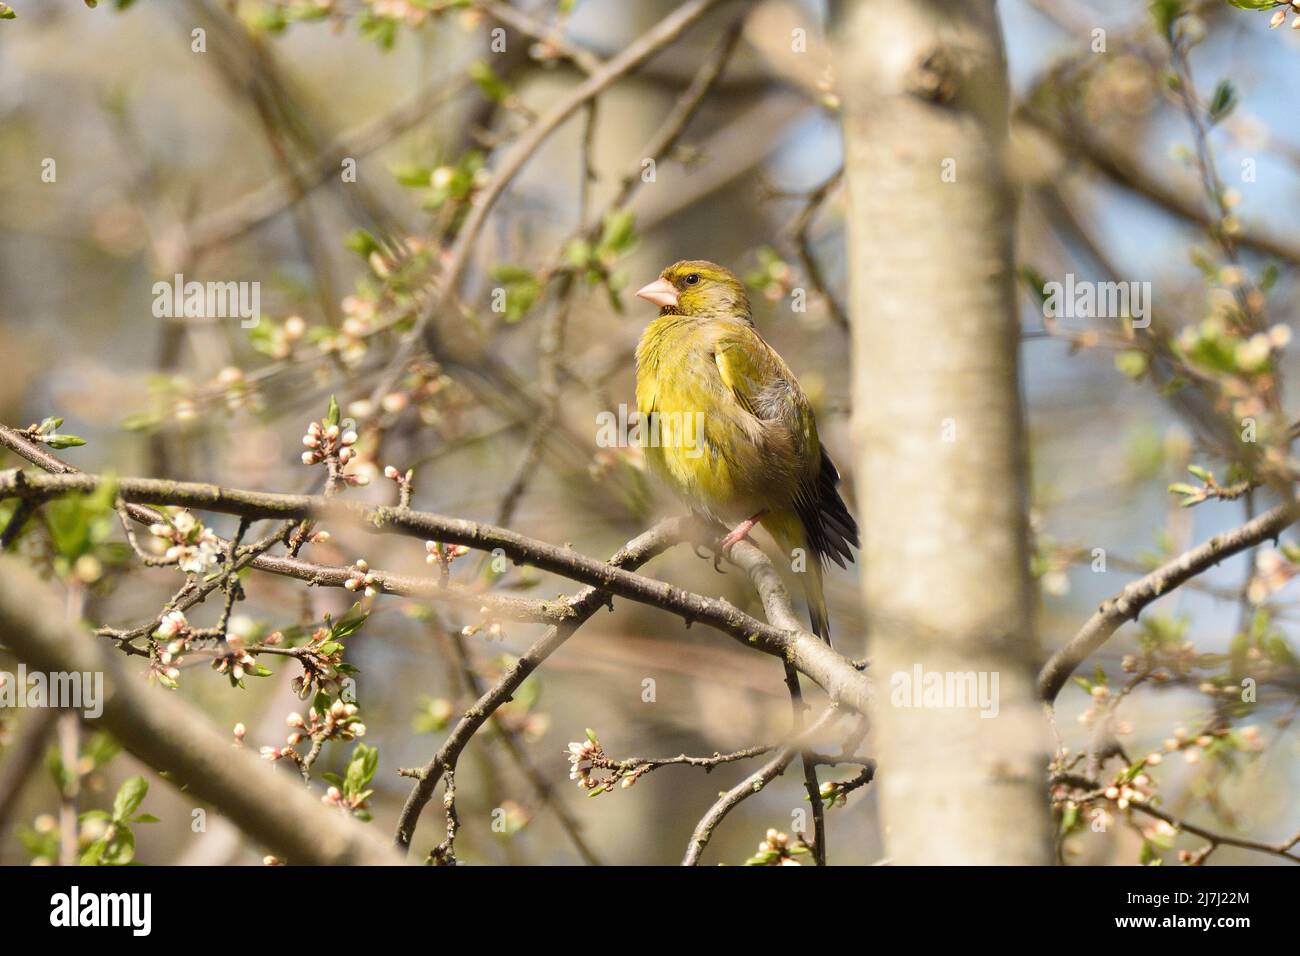 Greenfinch male sunning himself on a branch after washing in a nearby stream. England, UK. Stock Photo